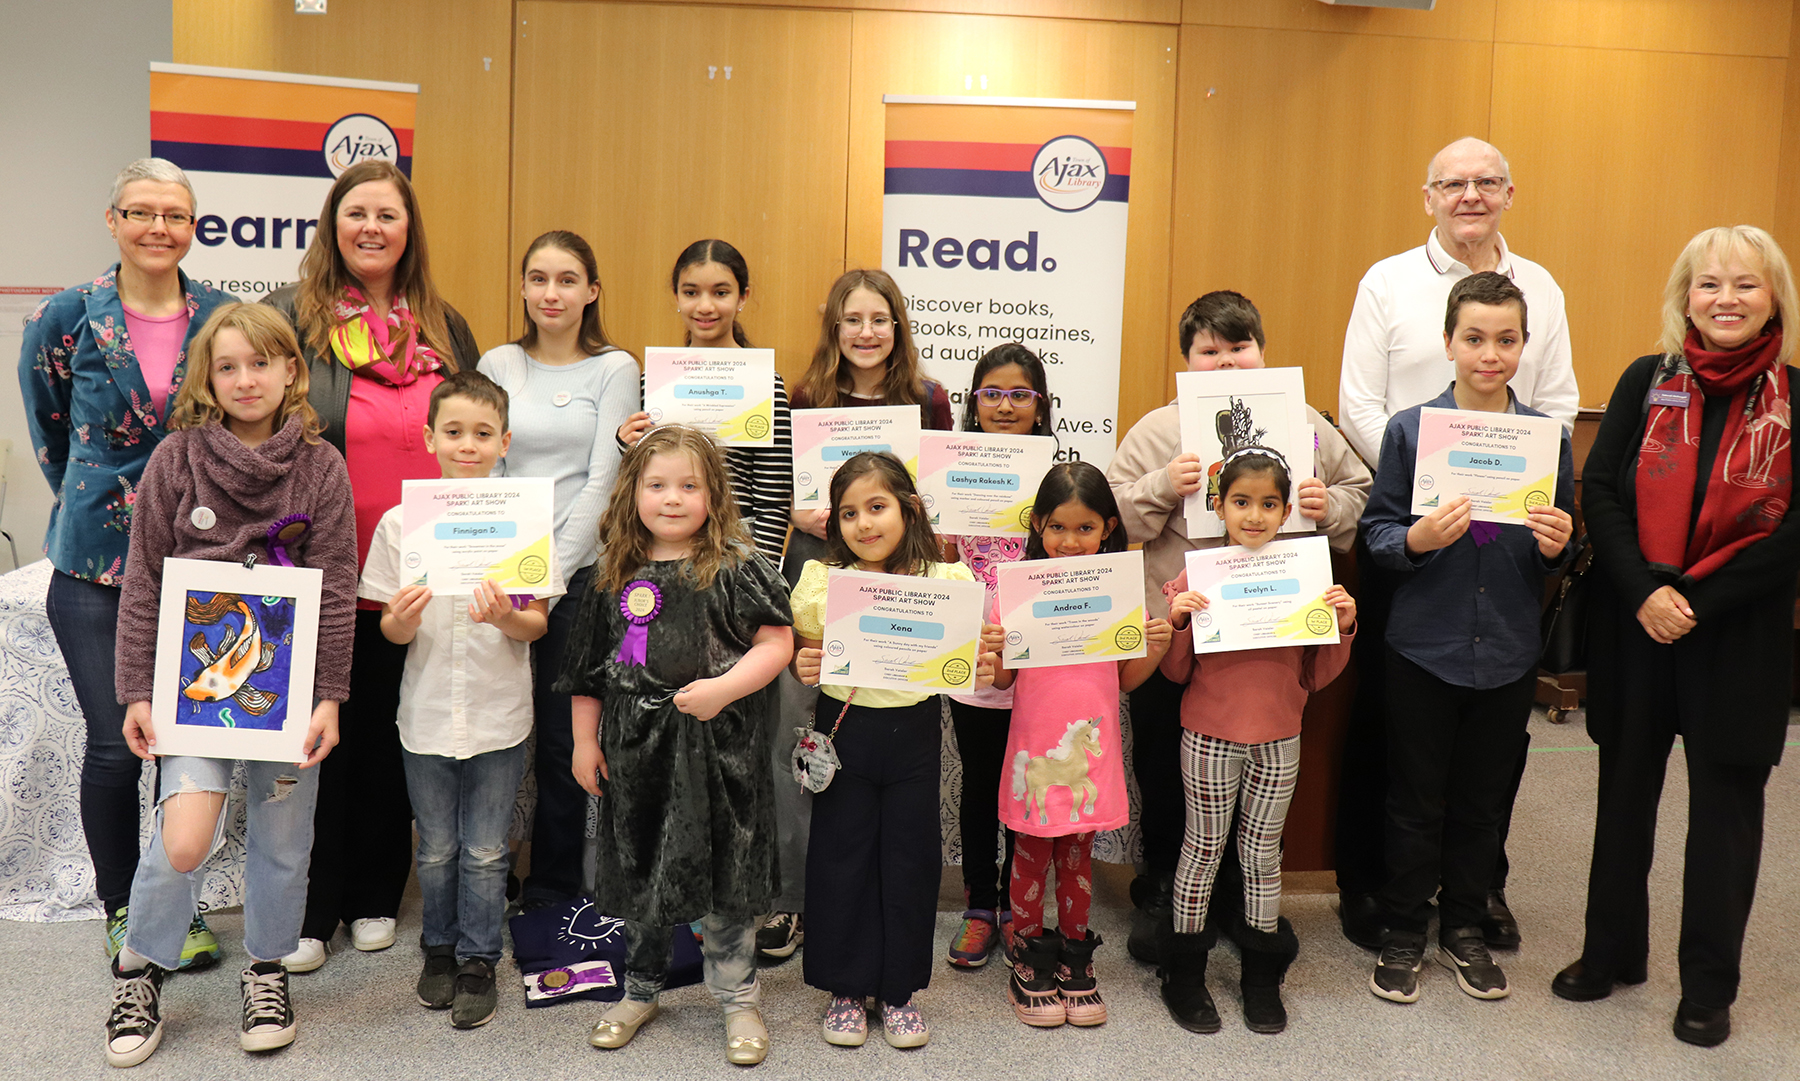 The group of Spark winners with the judges and Library staff.